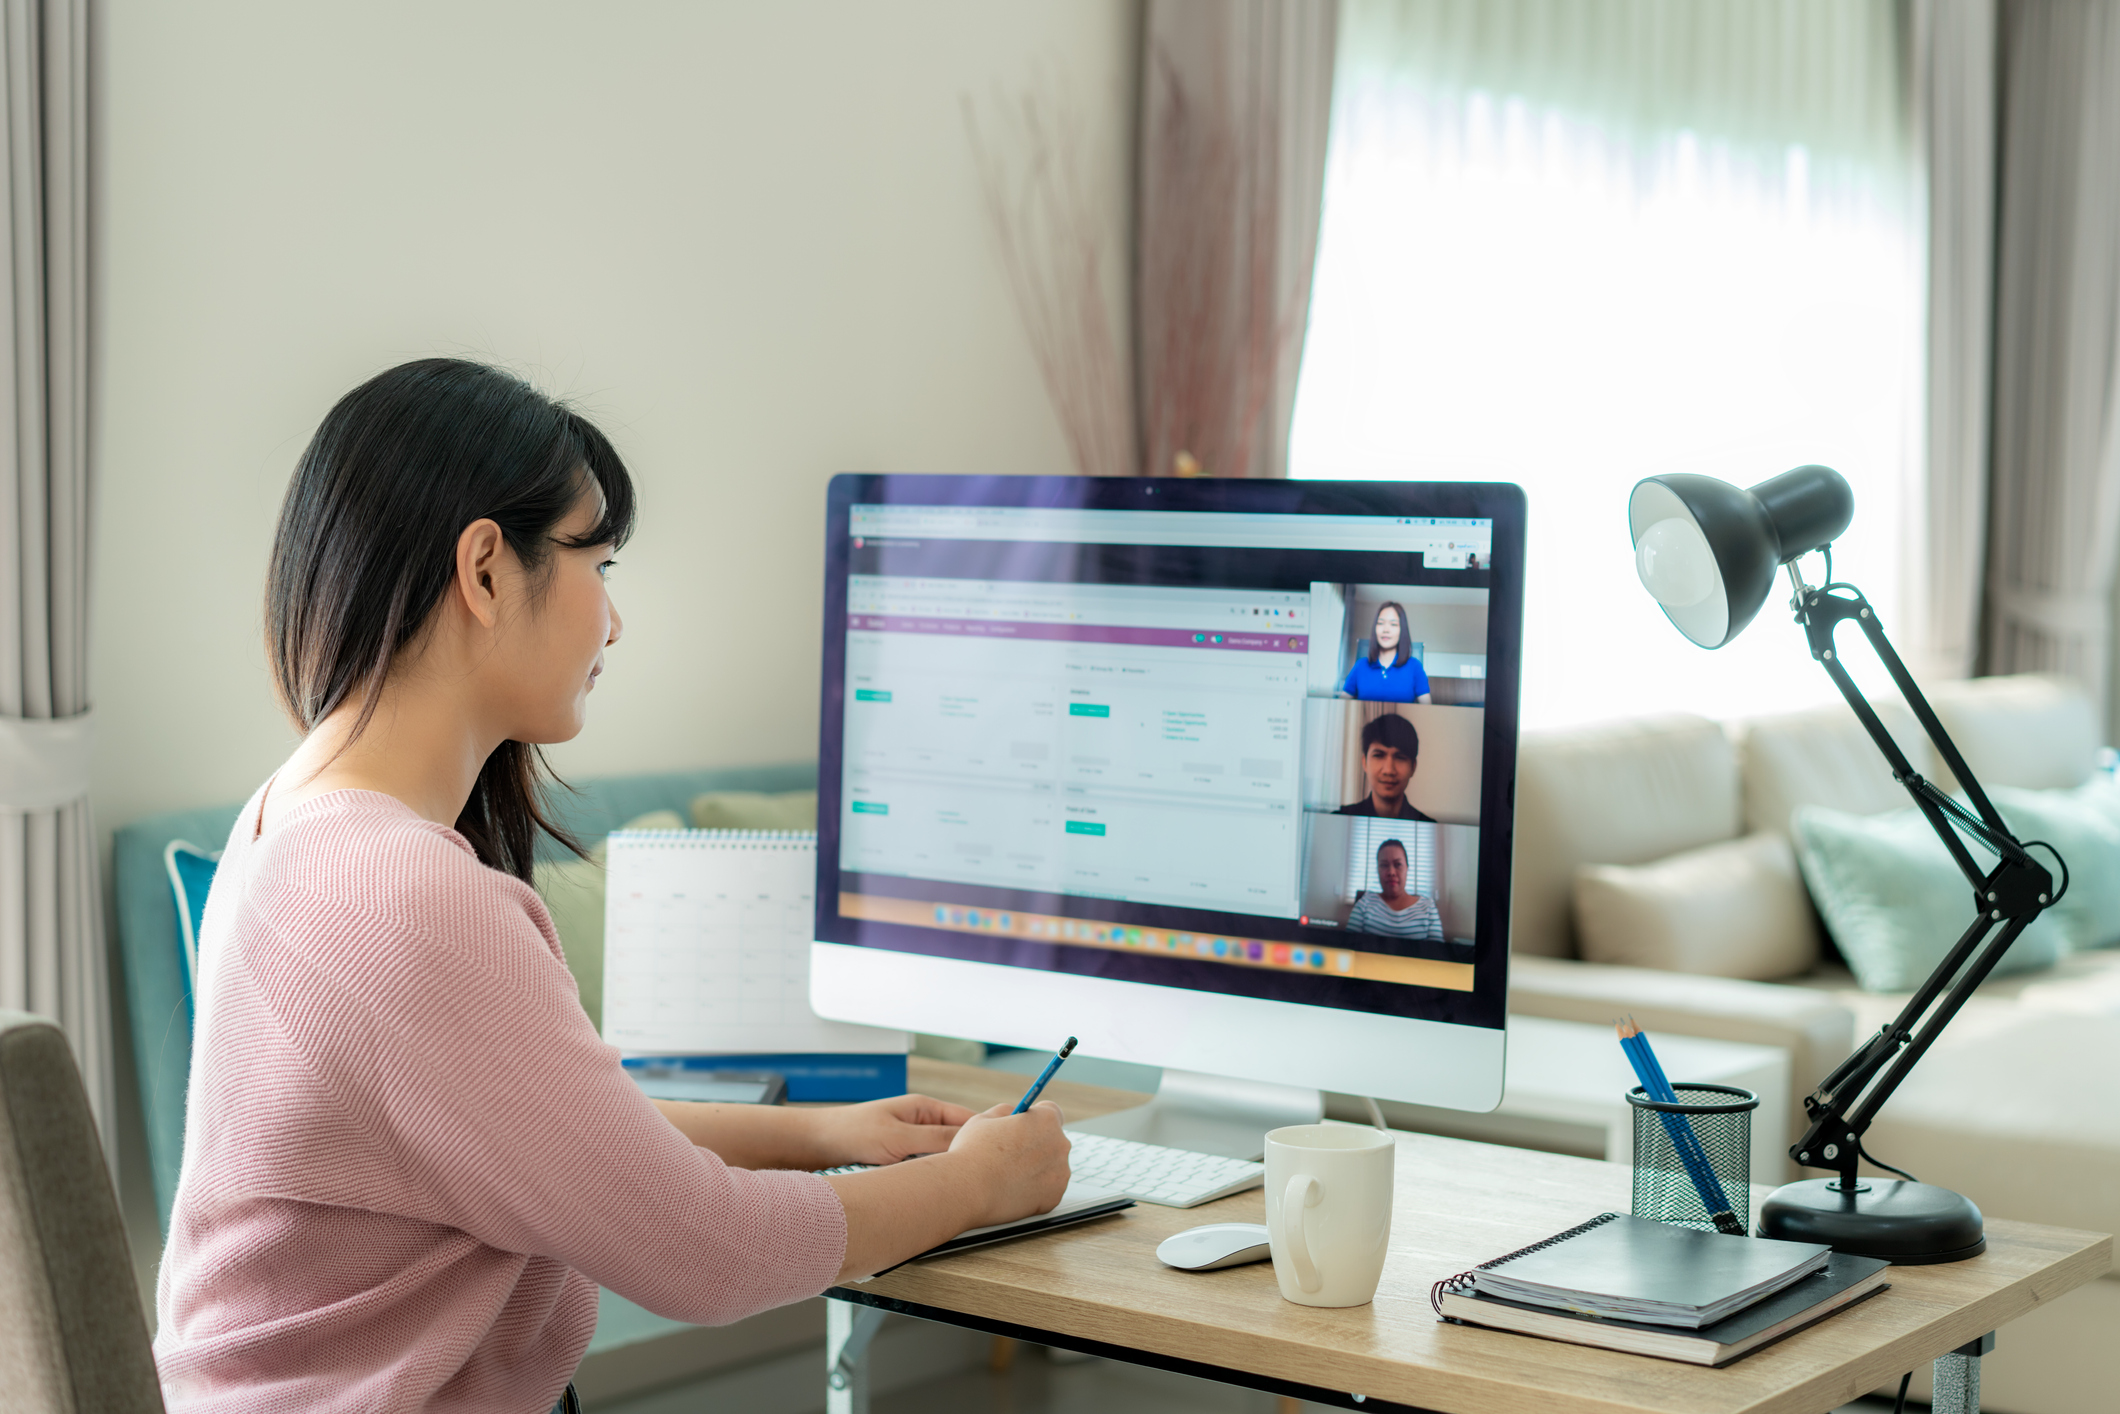 person looks at computer screen with virtual conferencing displayed